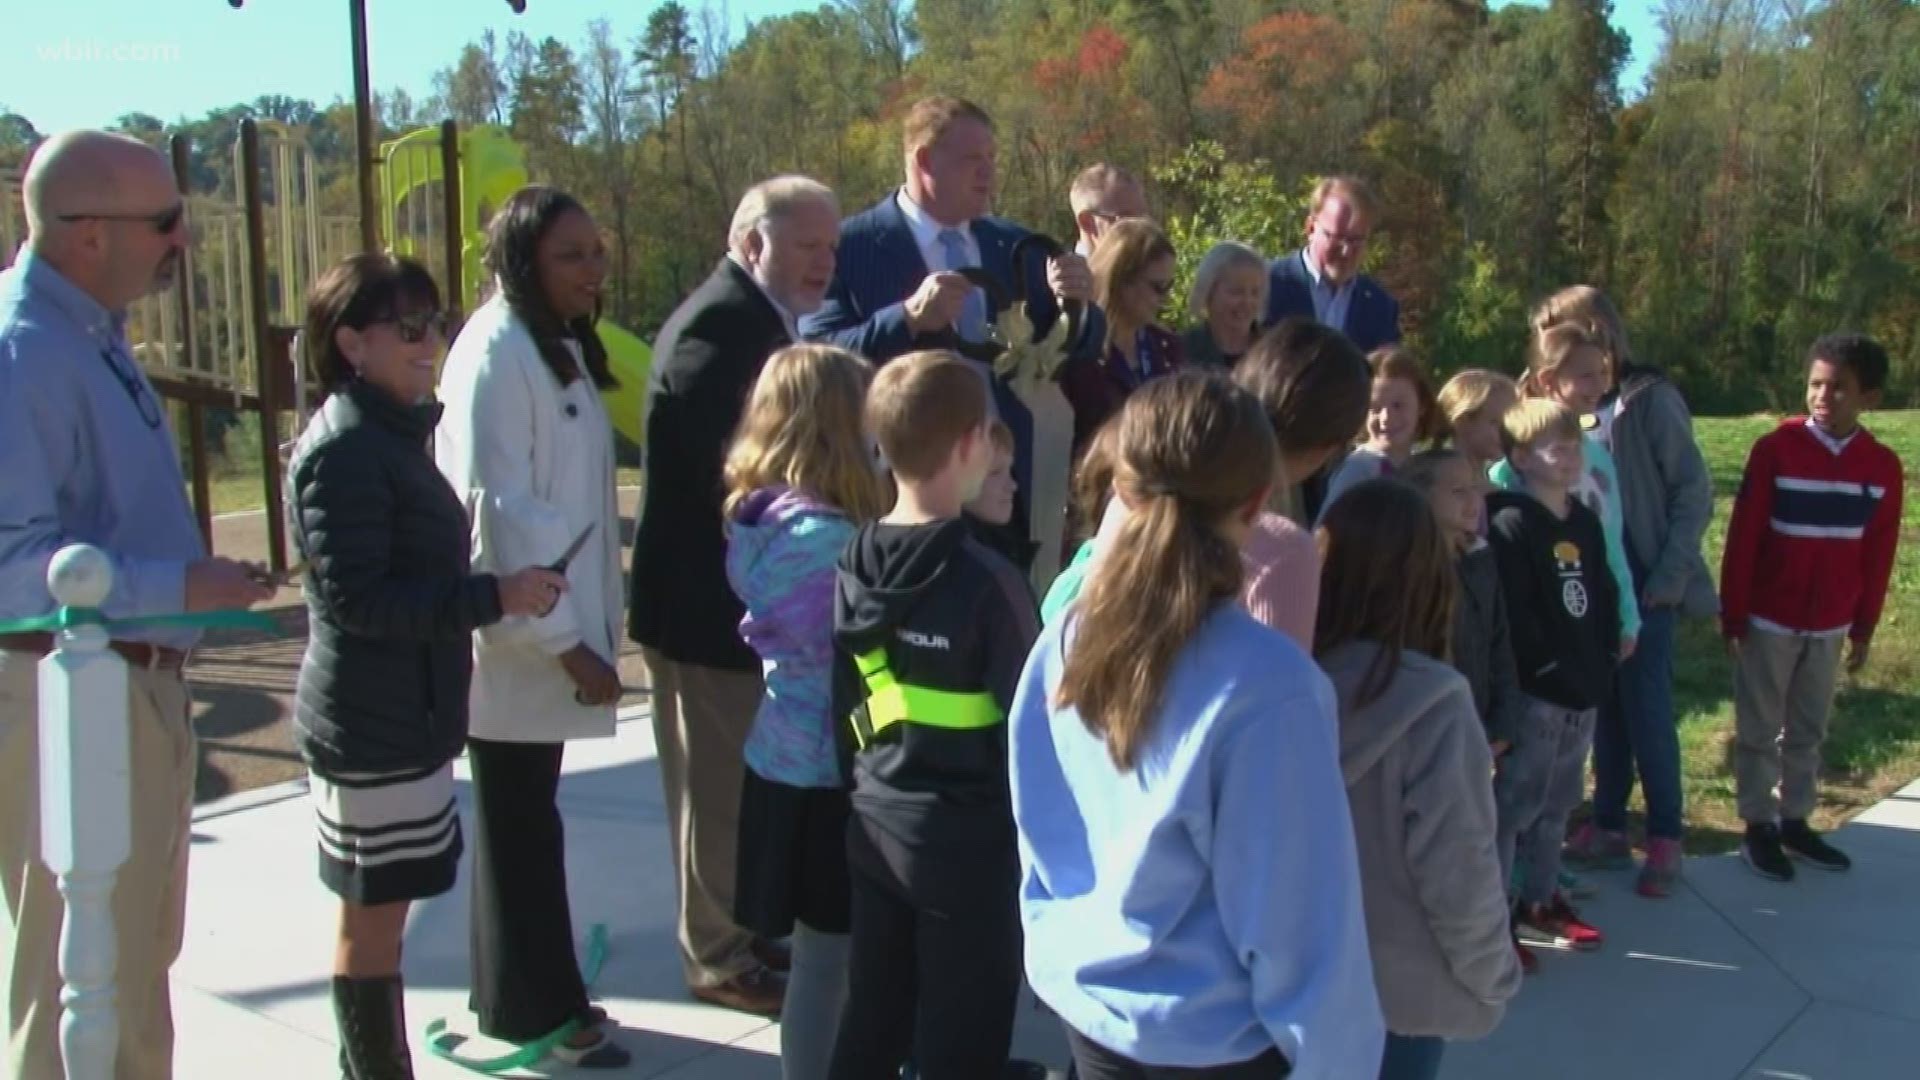 The new expansion of a South Knox County park is now open.